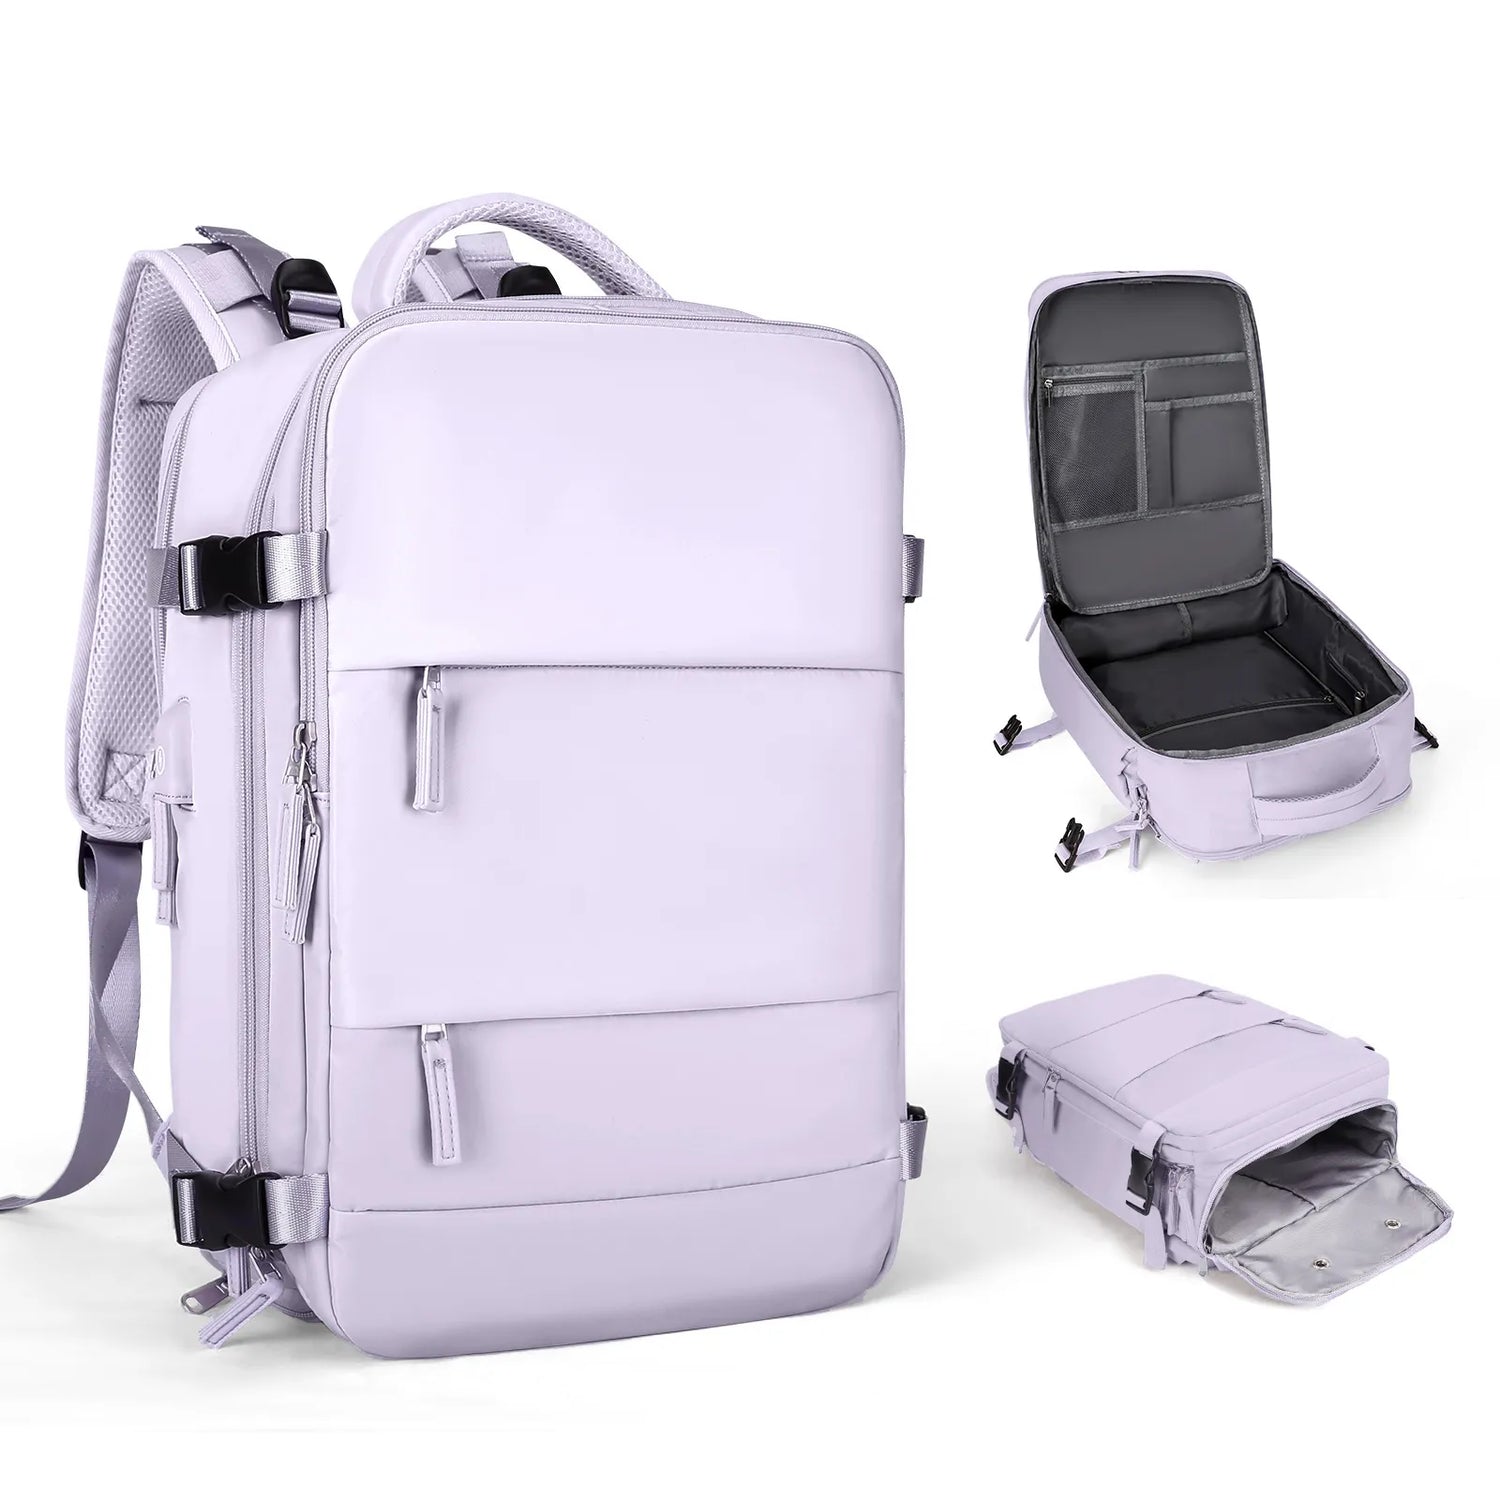 Lavender travel backpack personal item with wet dry pocket laptop sleeve usb charger and shoe sleeve